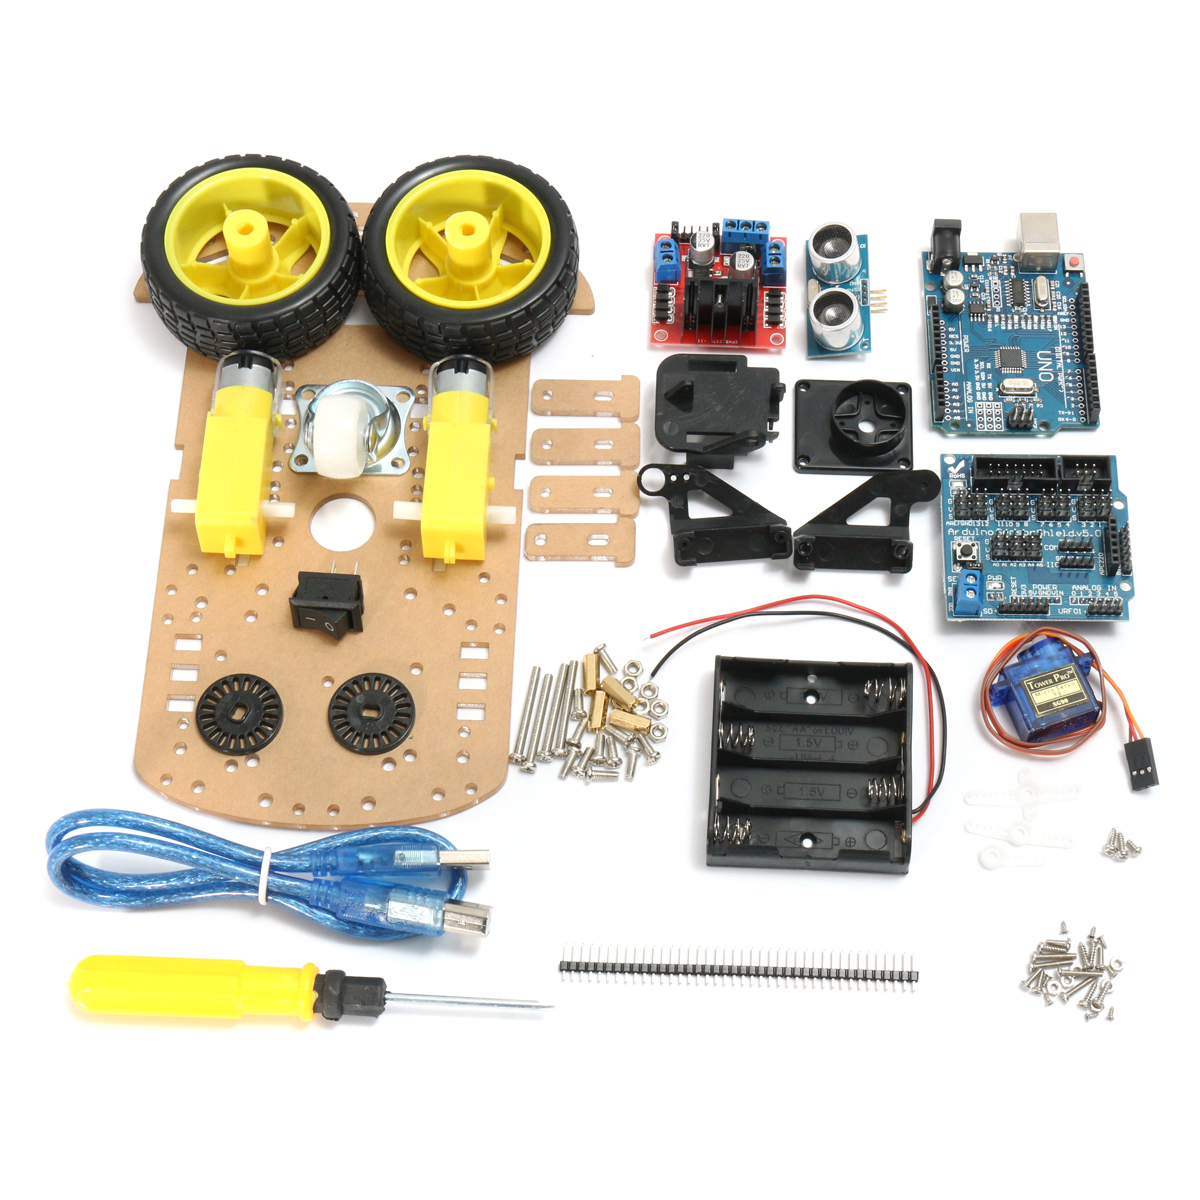 Geekcreitreg-DIY-L298N-2WD-Ultrasonic-Smart-Tracking-Moteur-Robot-Car-Kit-for-Arduino---products-tha-1155139-3